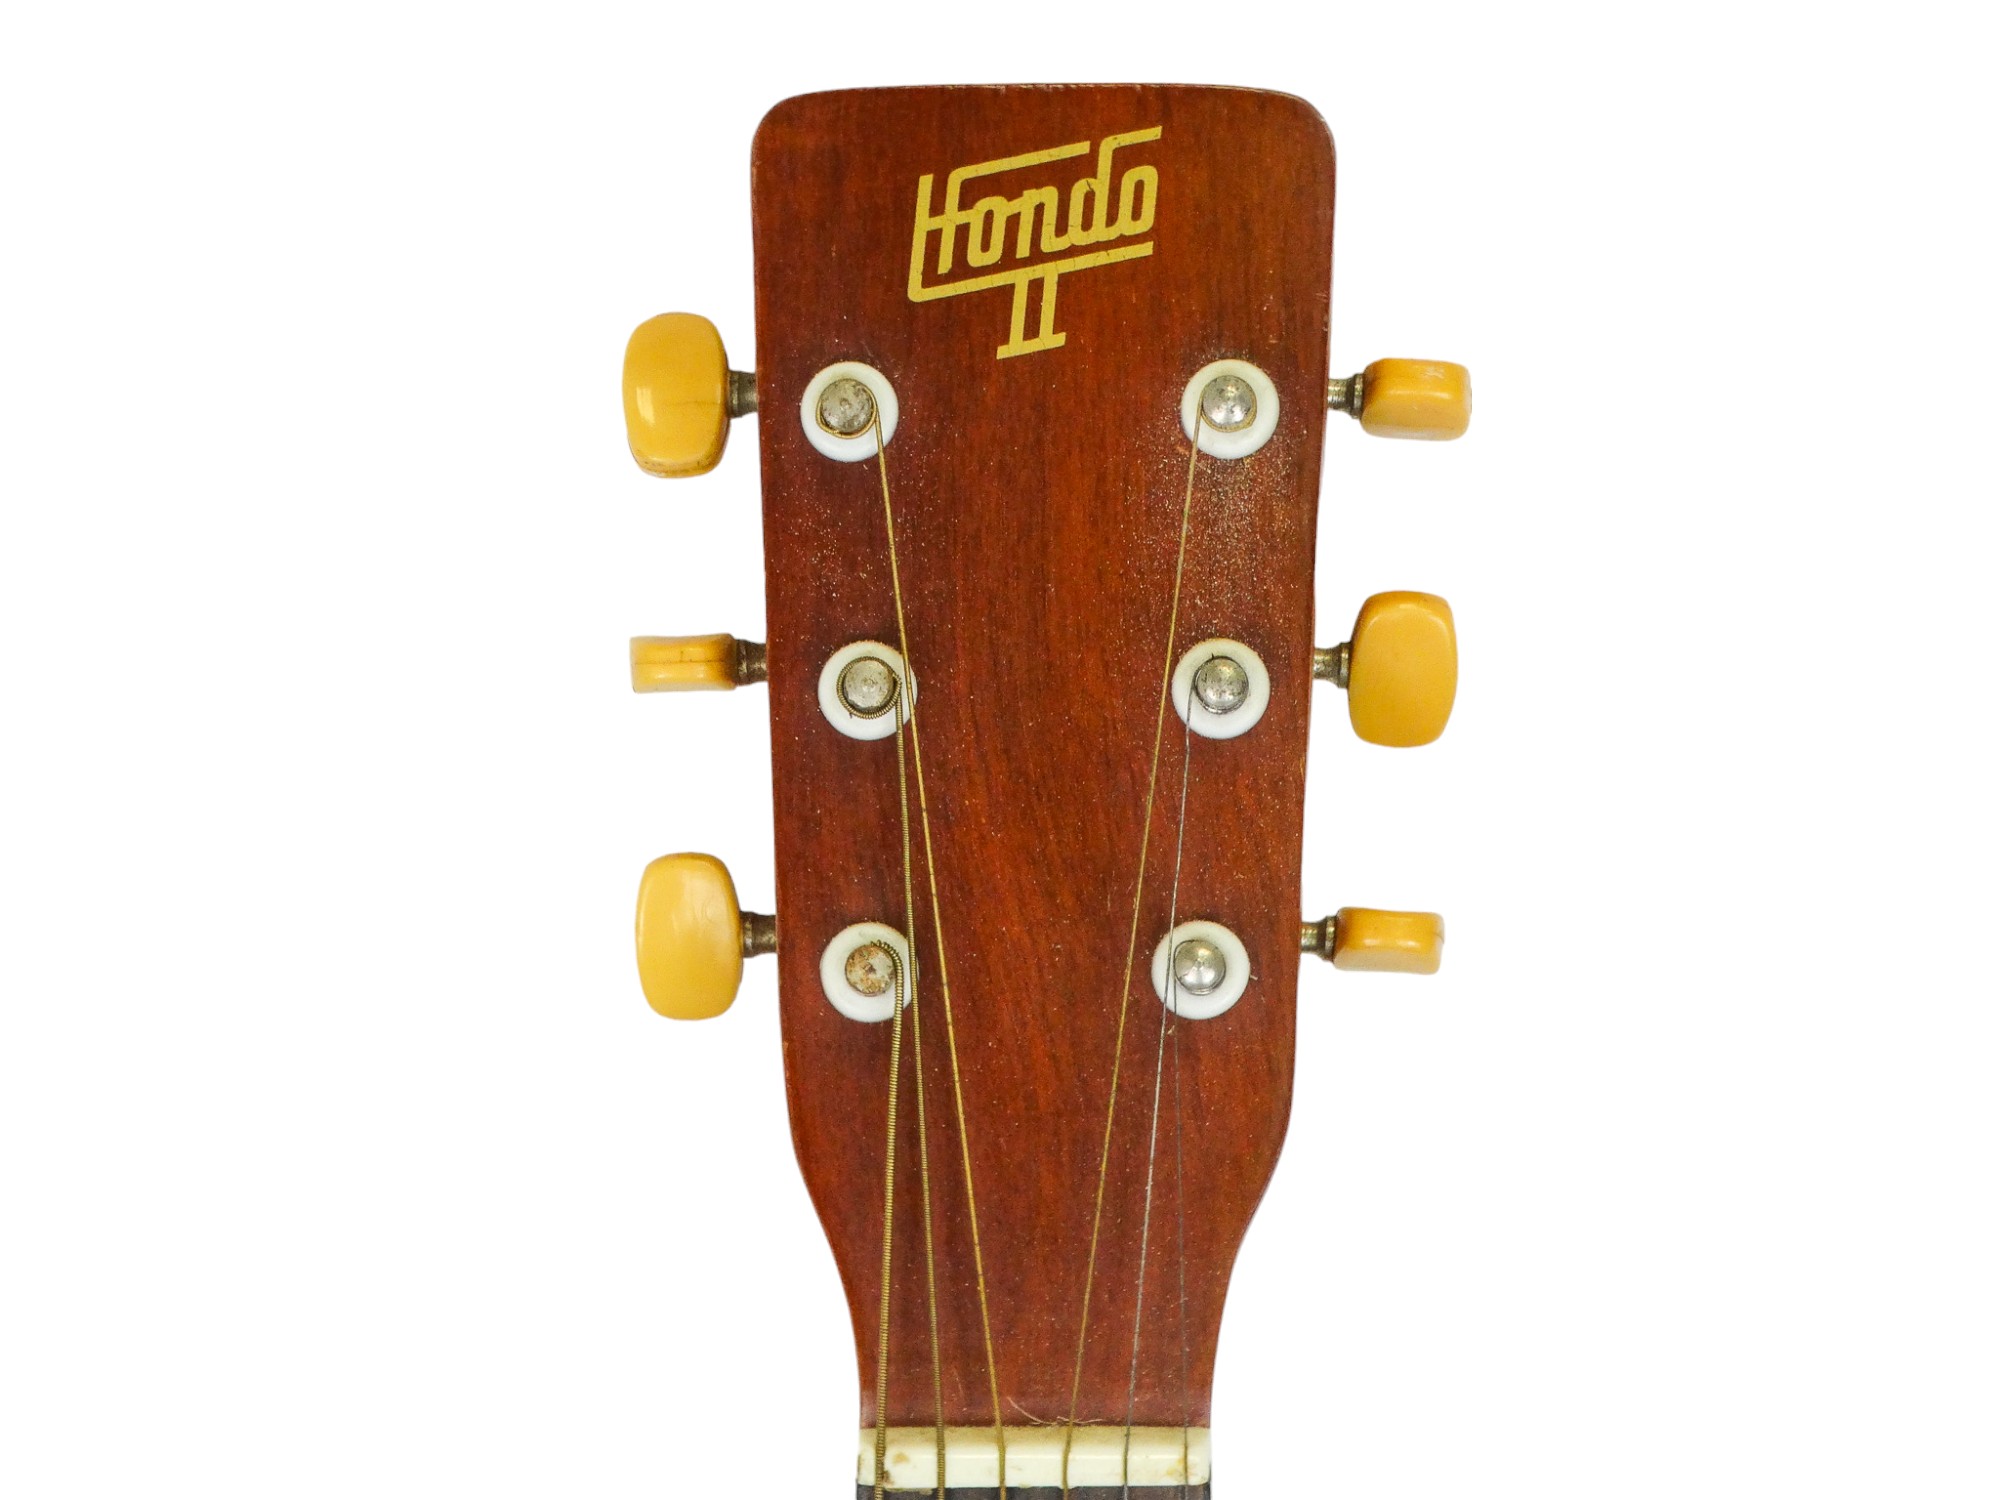 A Hondo II acoustic guitar - with soft case. - Image 5 of 7